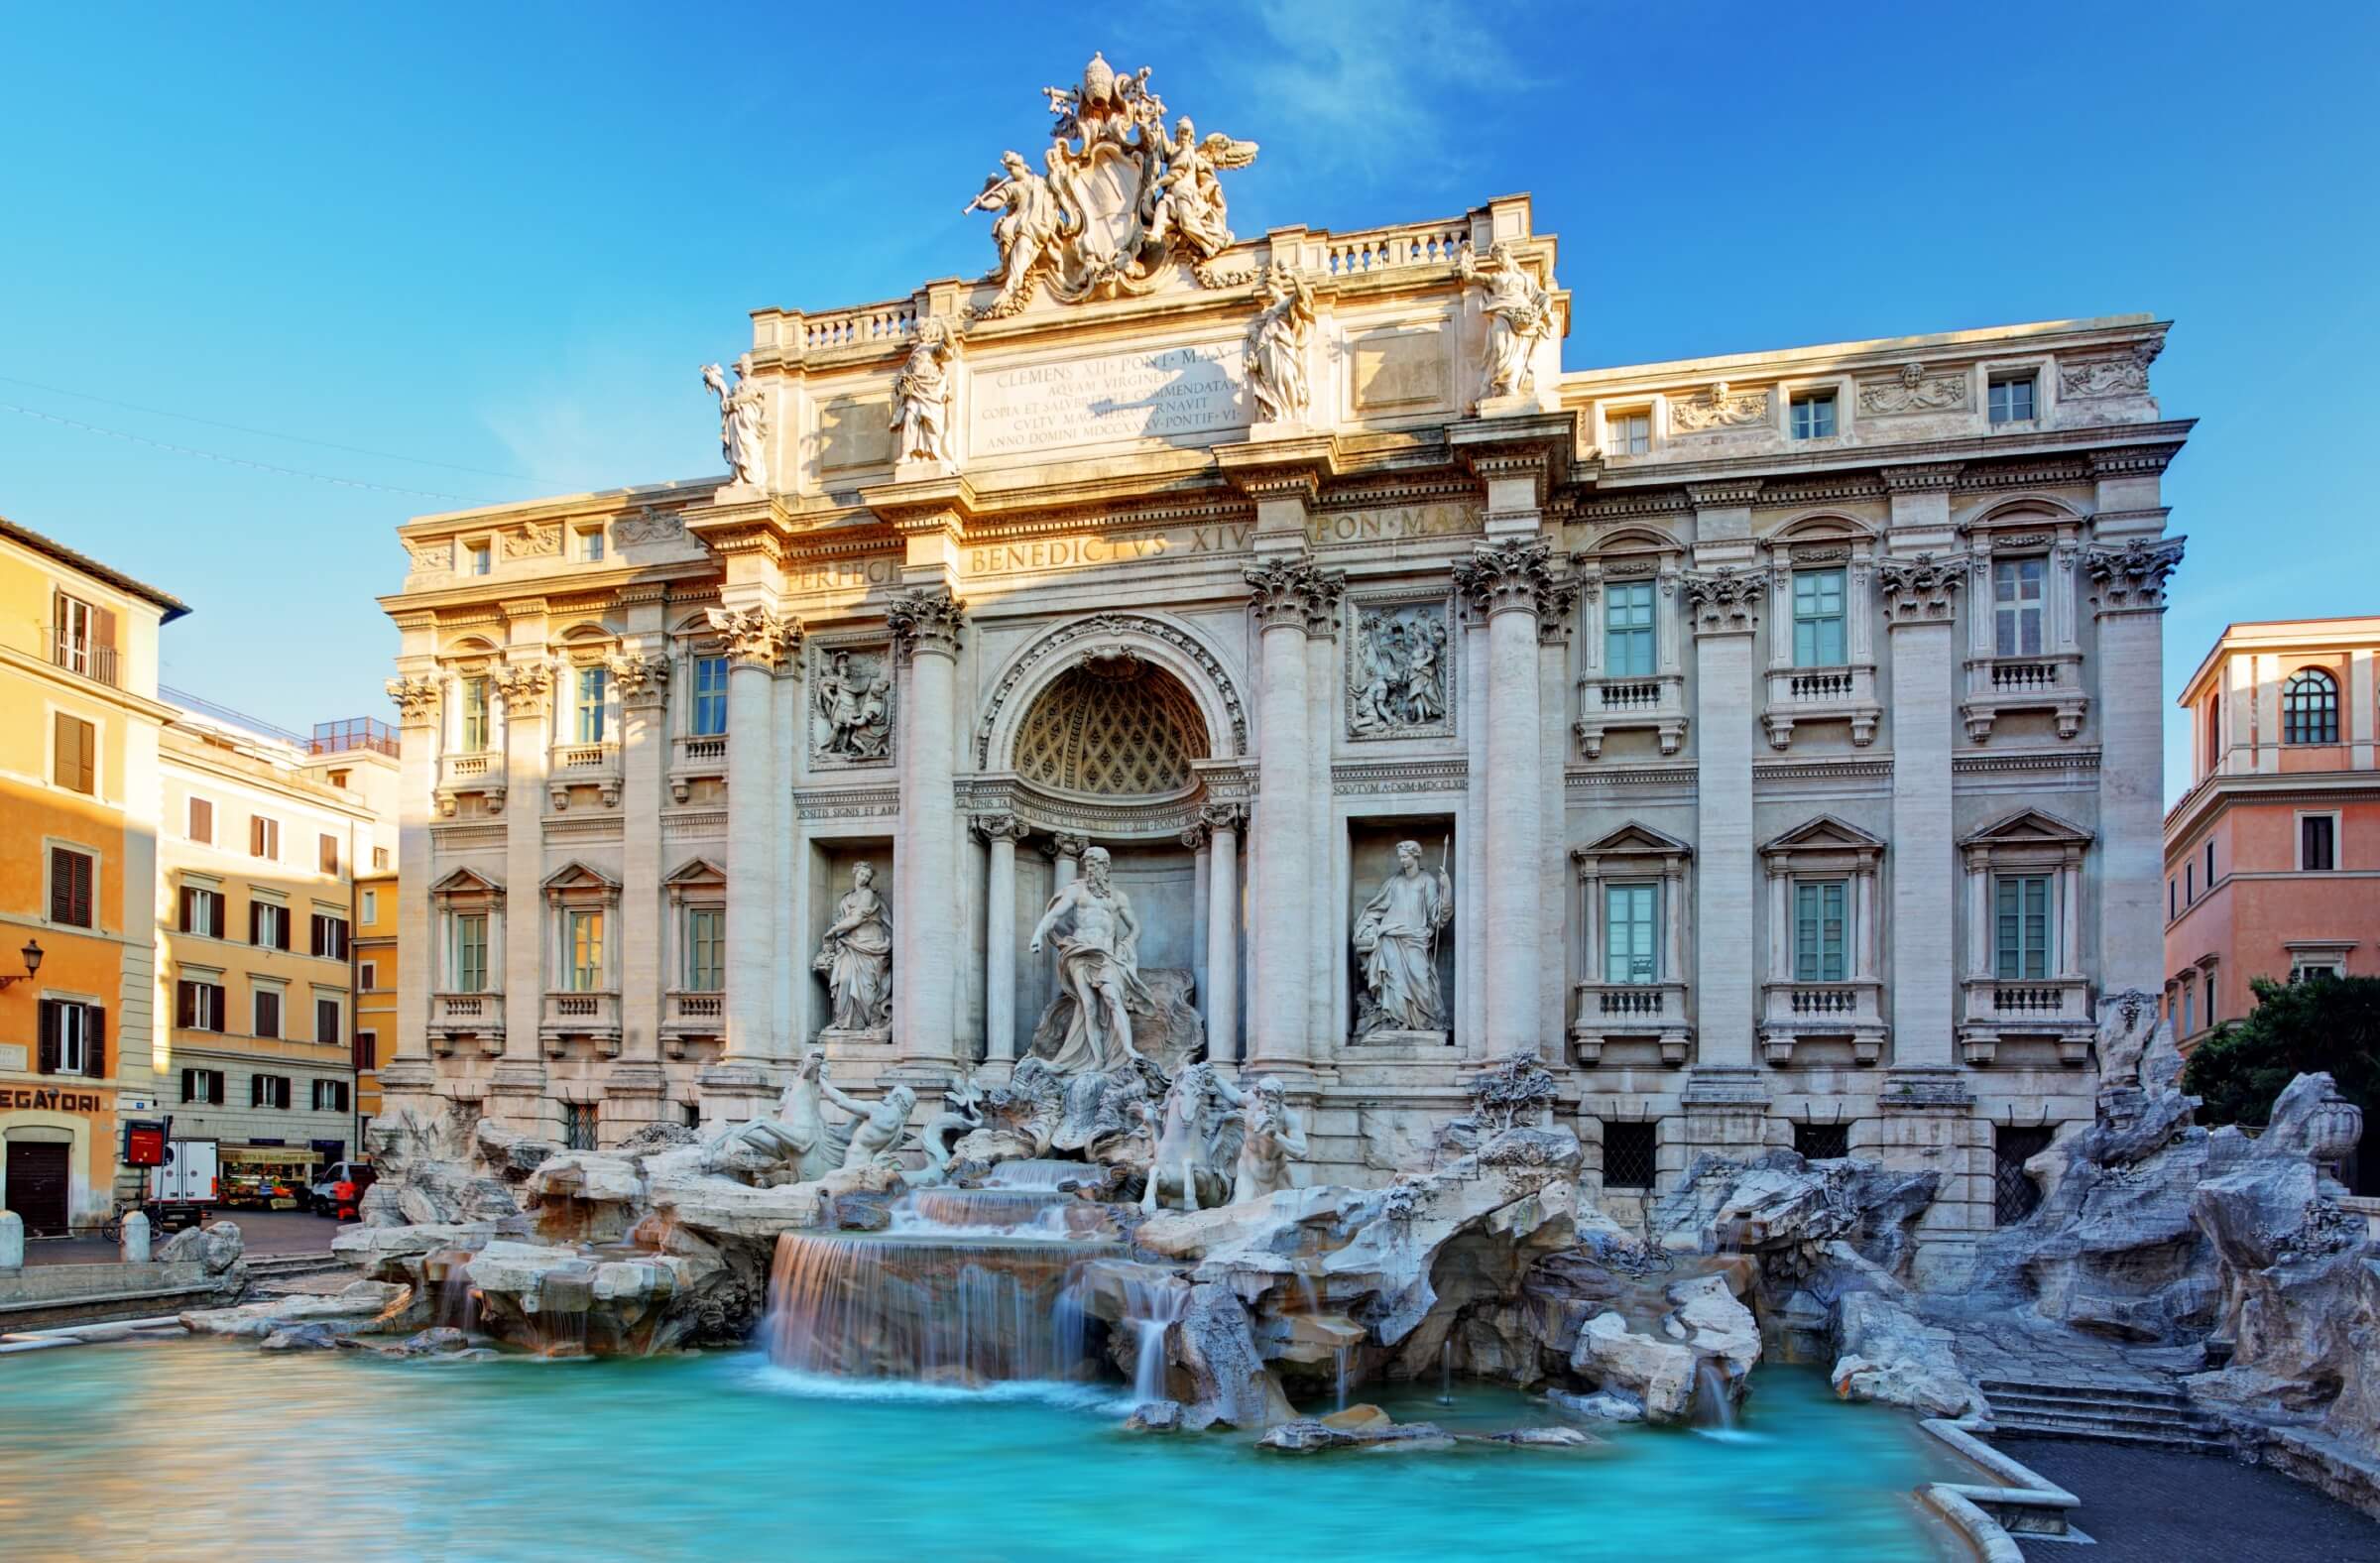 The city of Rome wants to keep the money thrown into the Trevi fountain